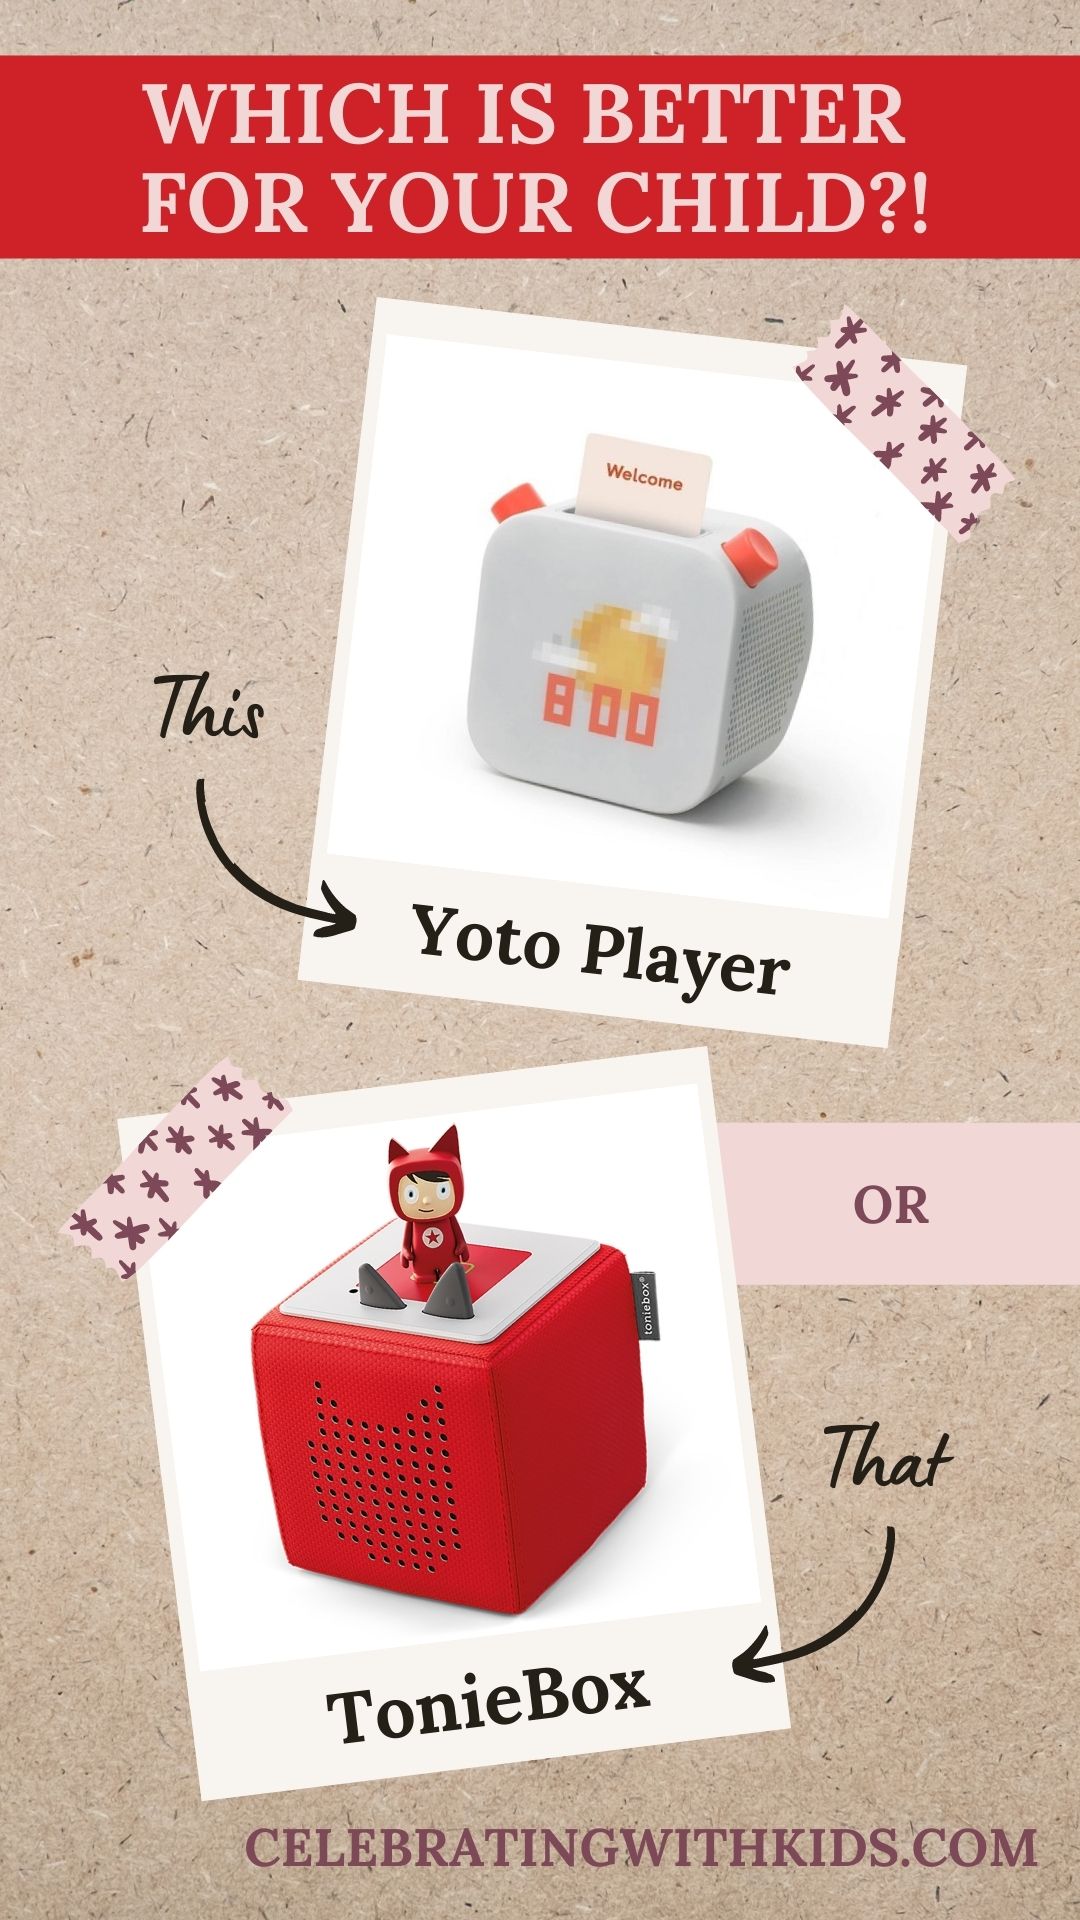 Tonie Box or Yoto Player? - Busy Busy Learning